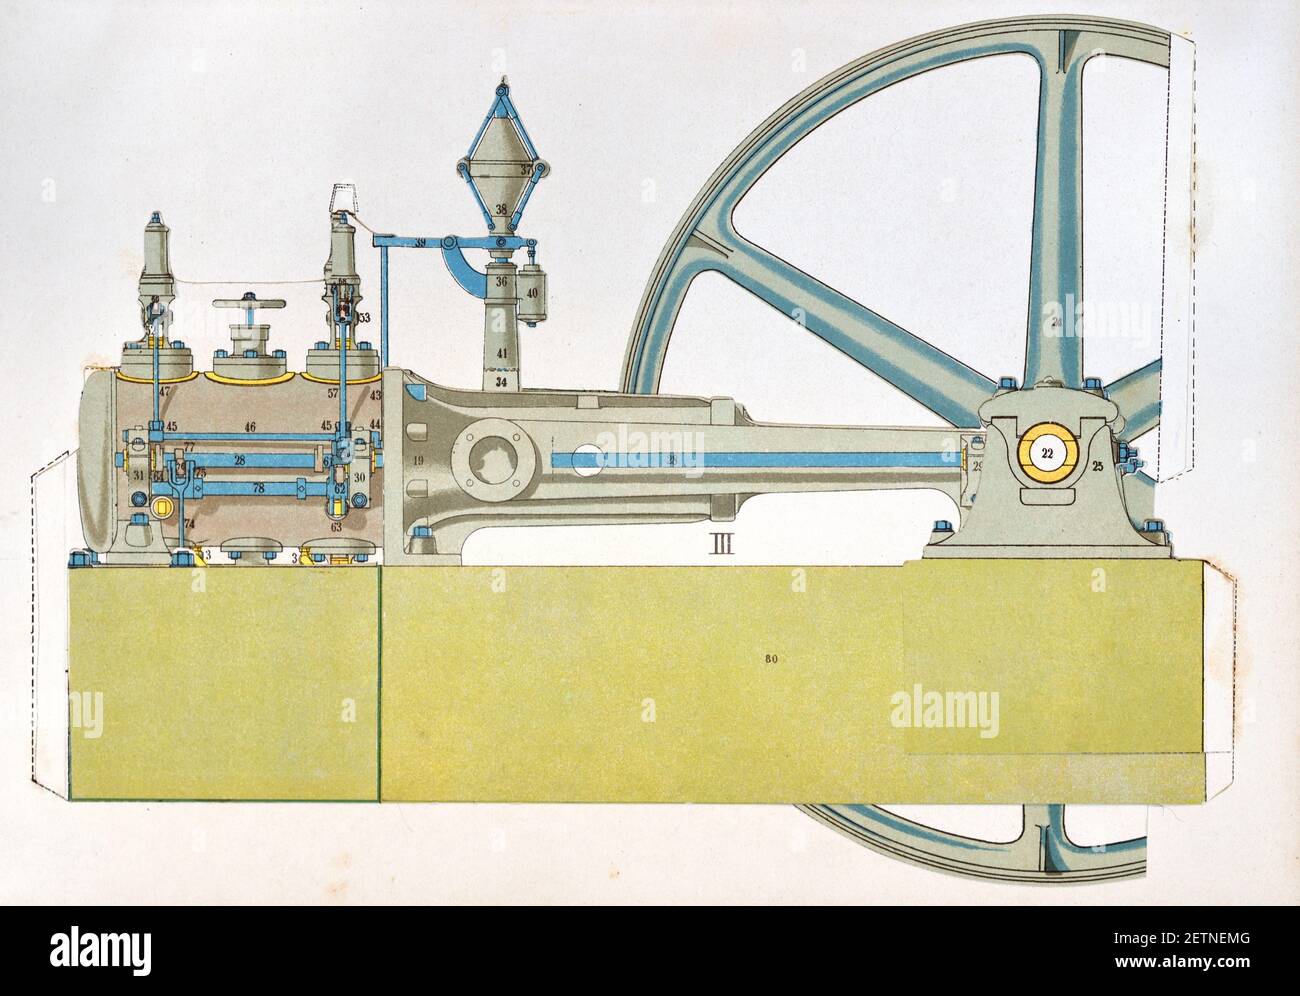 Cutaway Drawing, Cutaway Diagram of Vintage Steam Engine or Cut-Out Illustration or Diagram on White Background c1920 Stock Photo